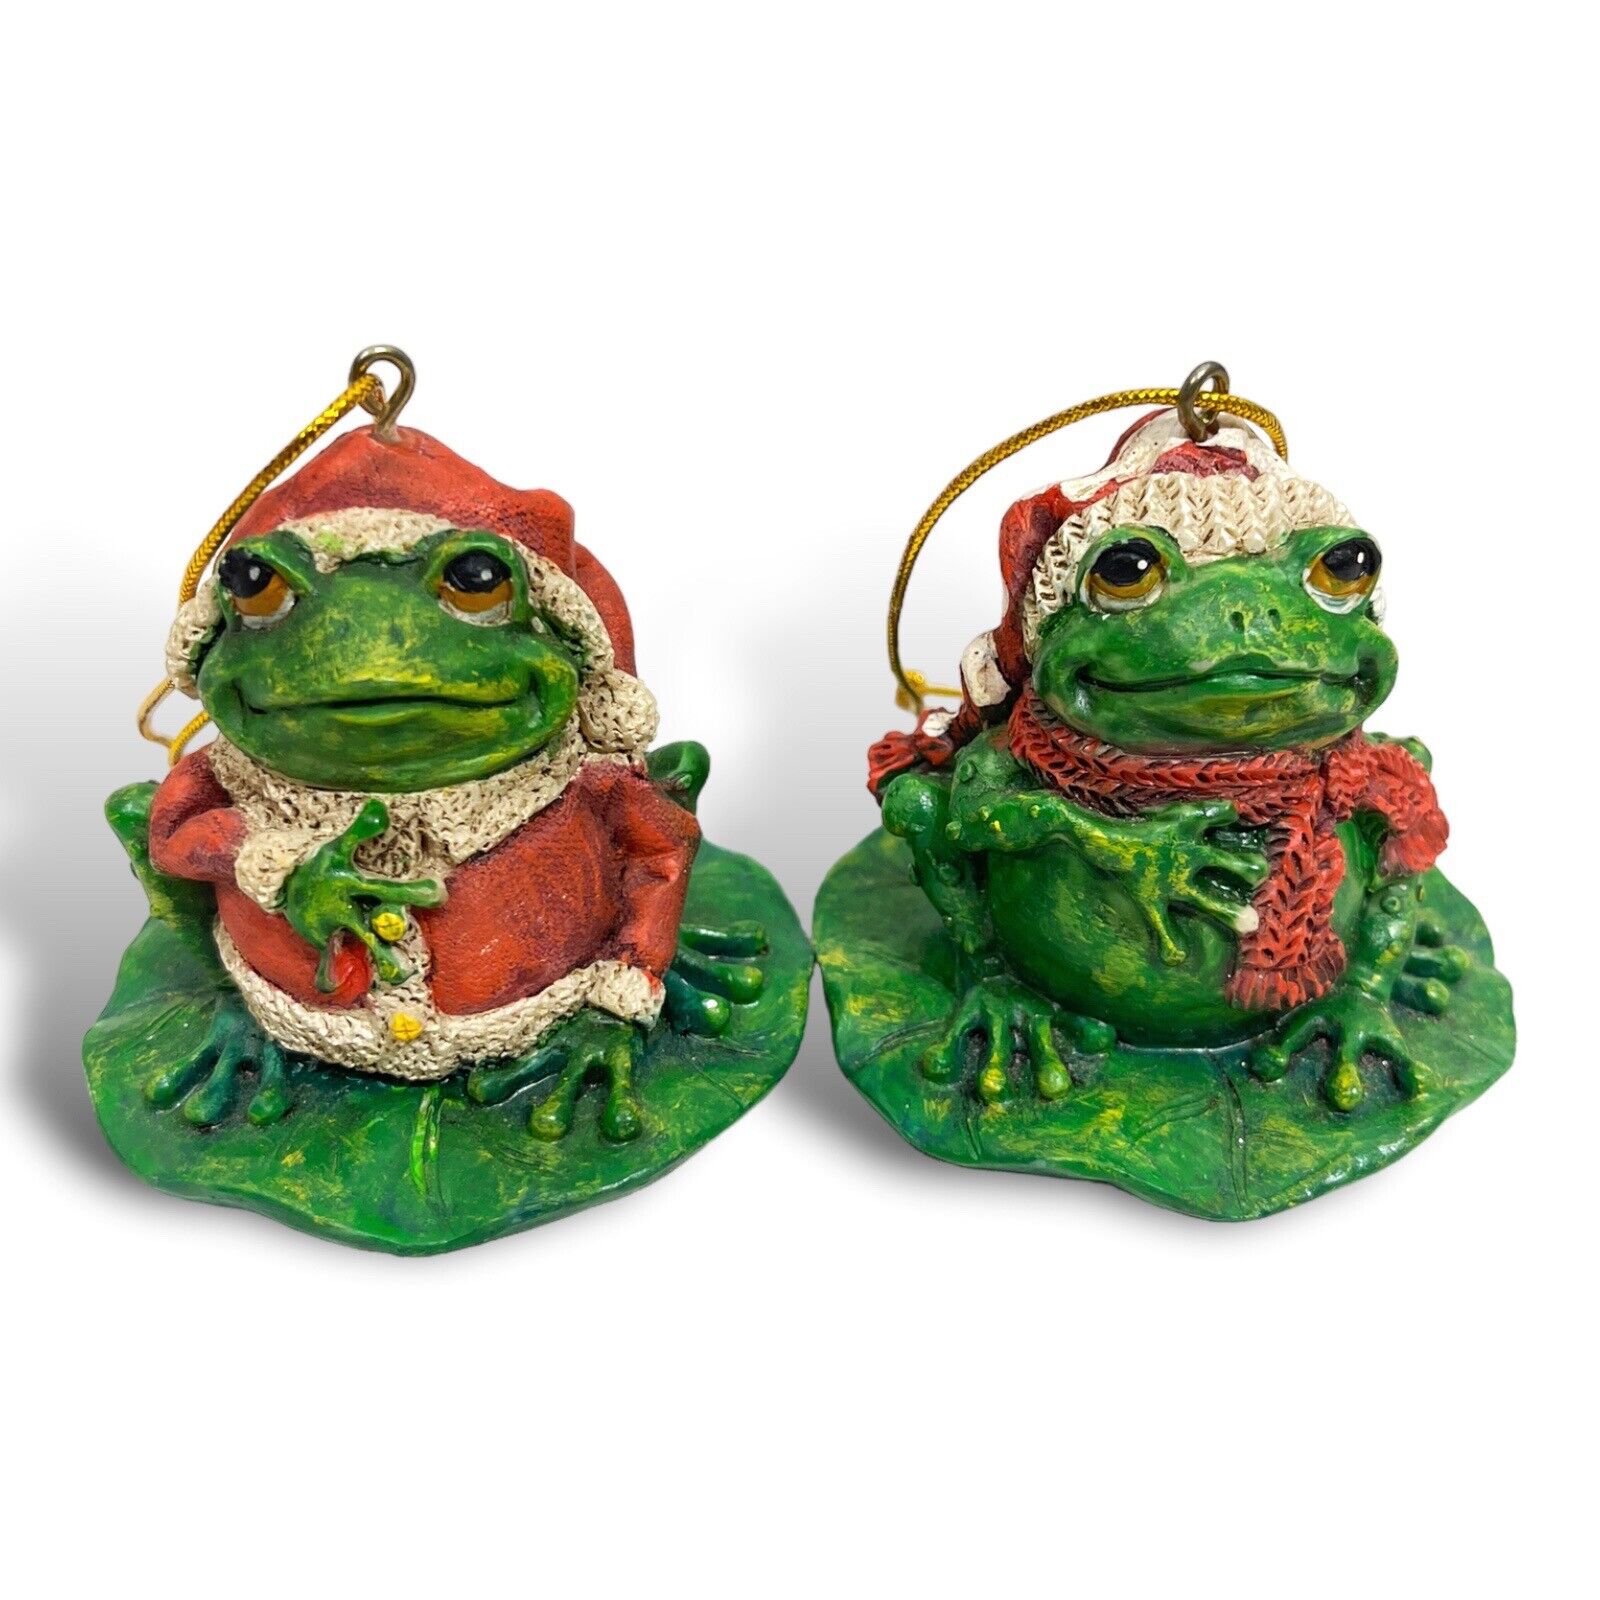 Frog Ornaments Dress As Santa Claus Vintage Christmas Toad Resin On Lily Pad